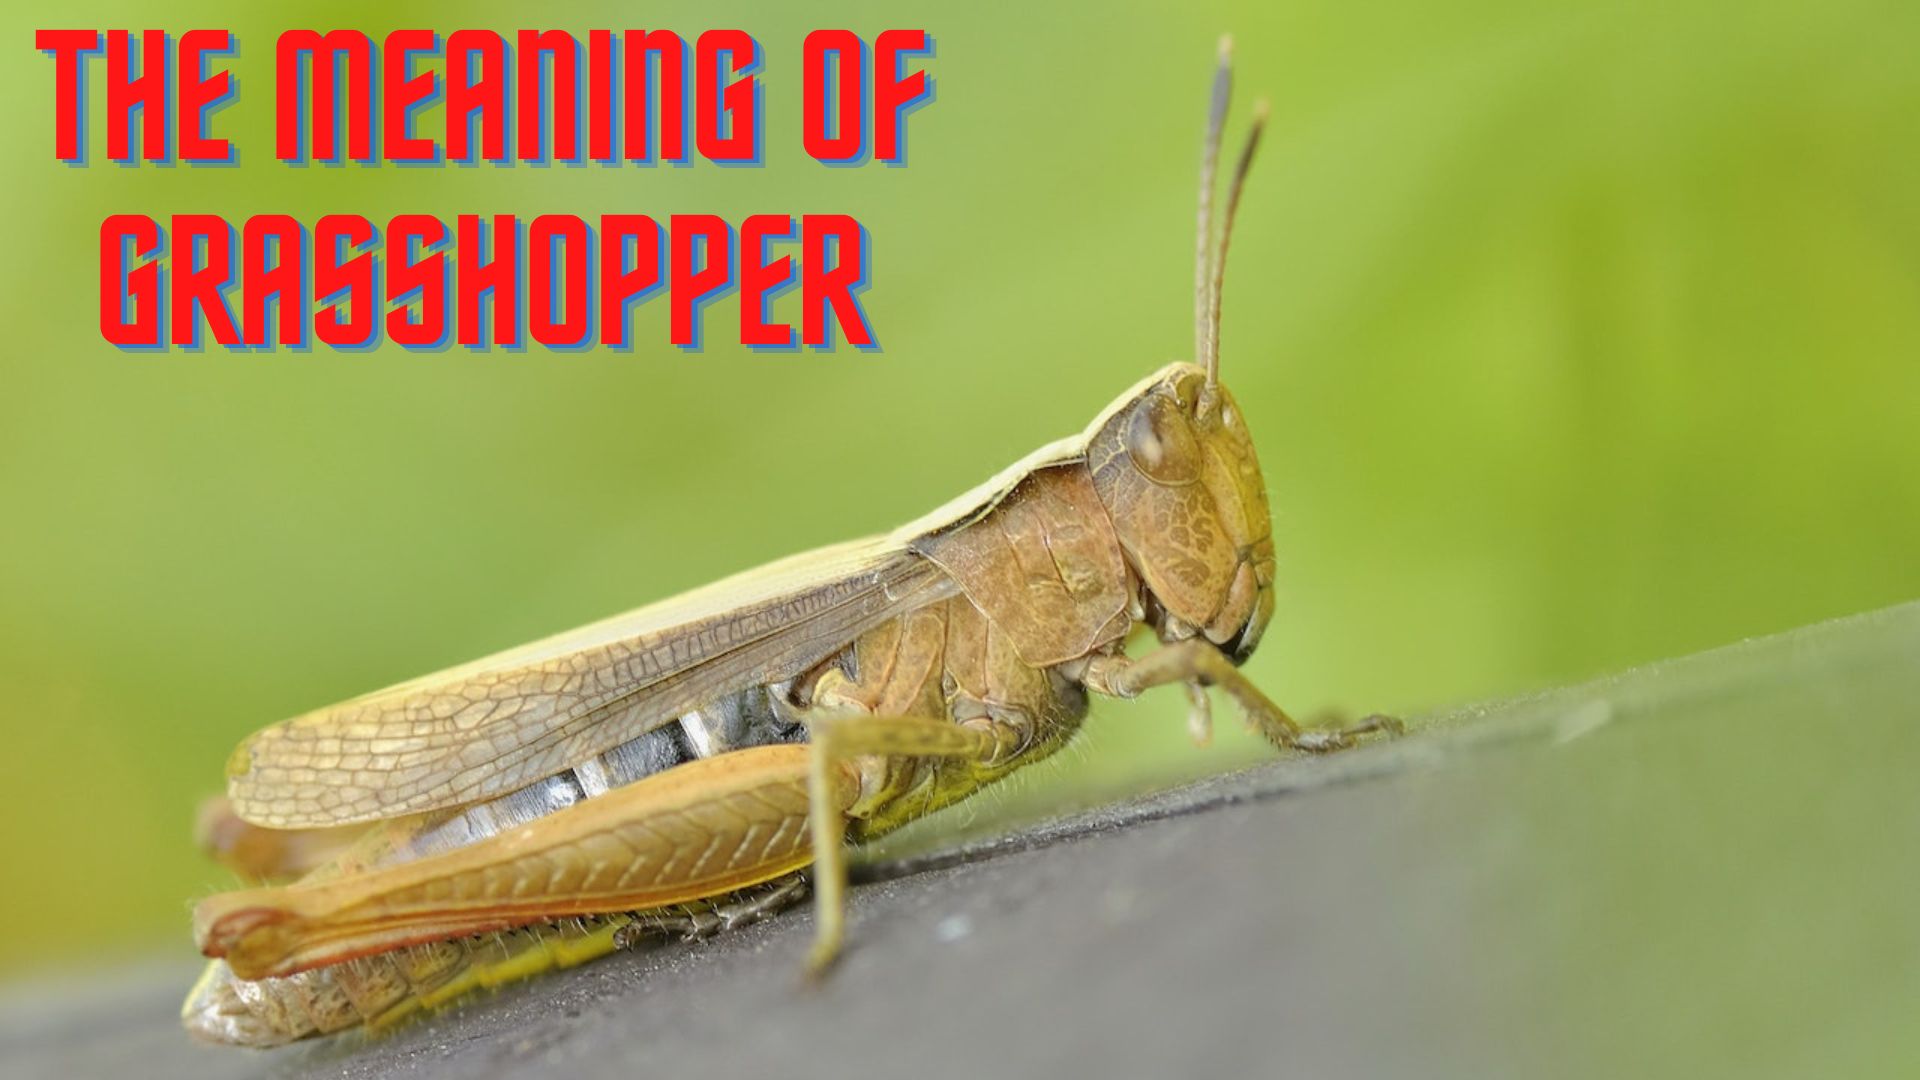 The Meaning Of Grasshopper - A Sign Of Freedom